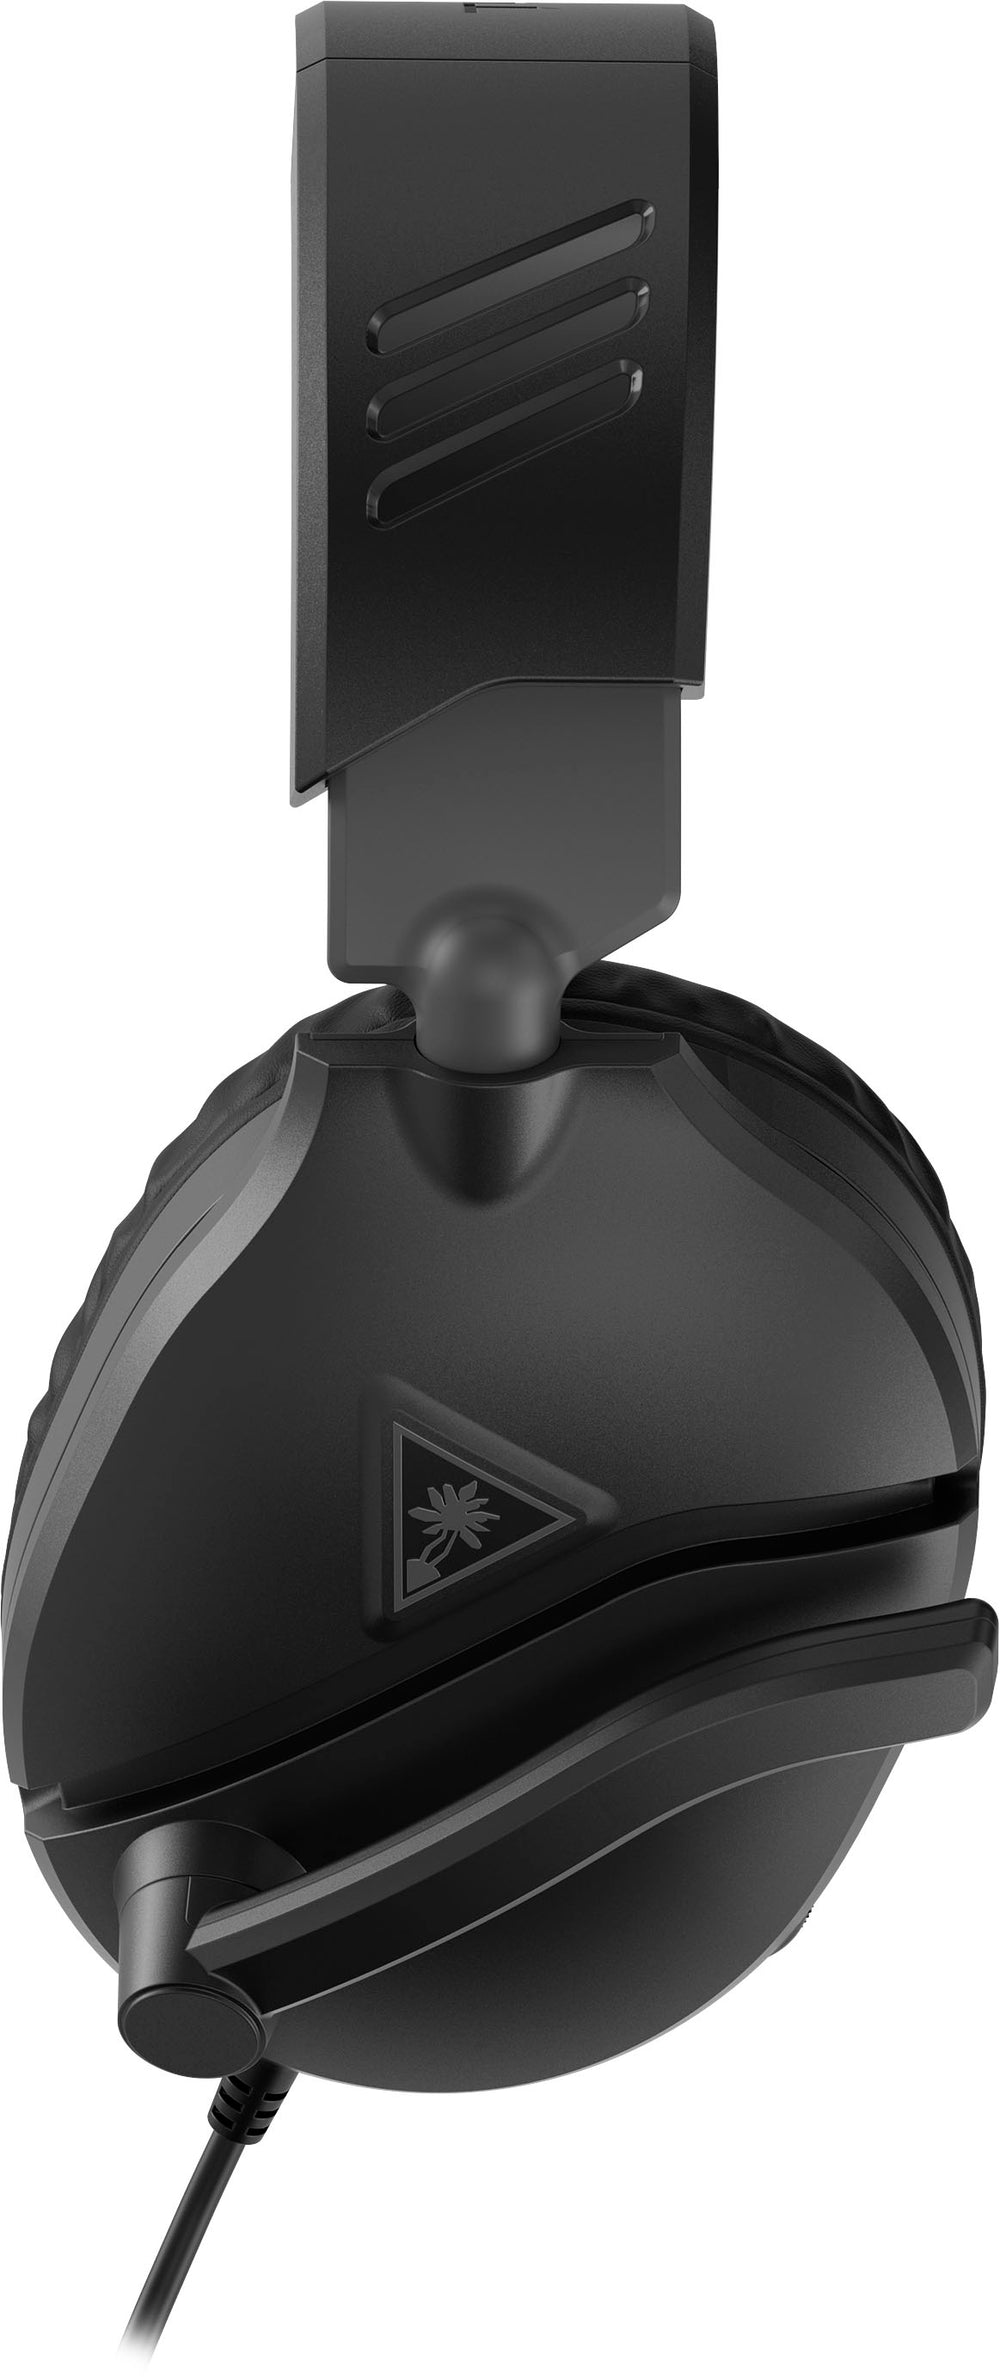 Turtle Beach - Recon 70 Gaming Headset for Xbox Series X|S, Xbox One, PS5, PS4, Nintendo Switch, PC & Mobile - 3.5mm Wired Connection - Black_1